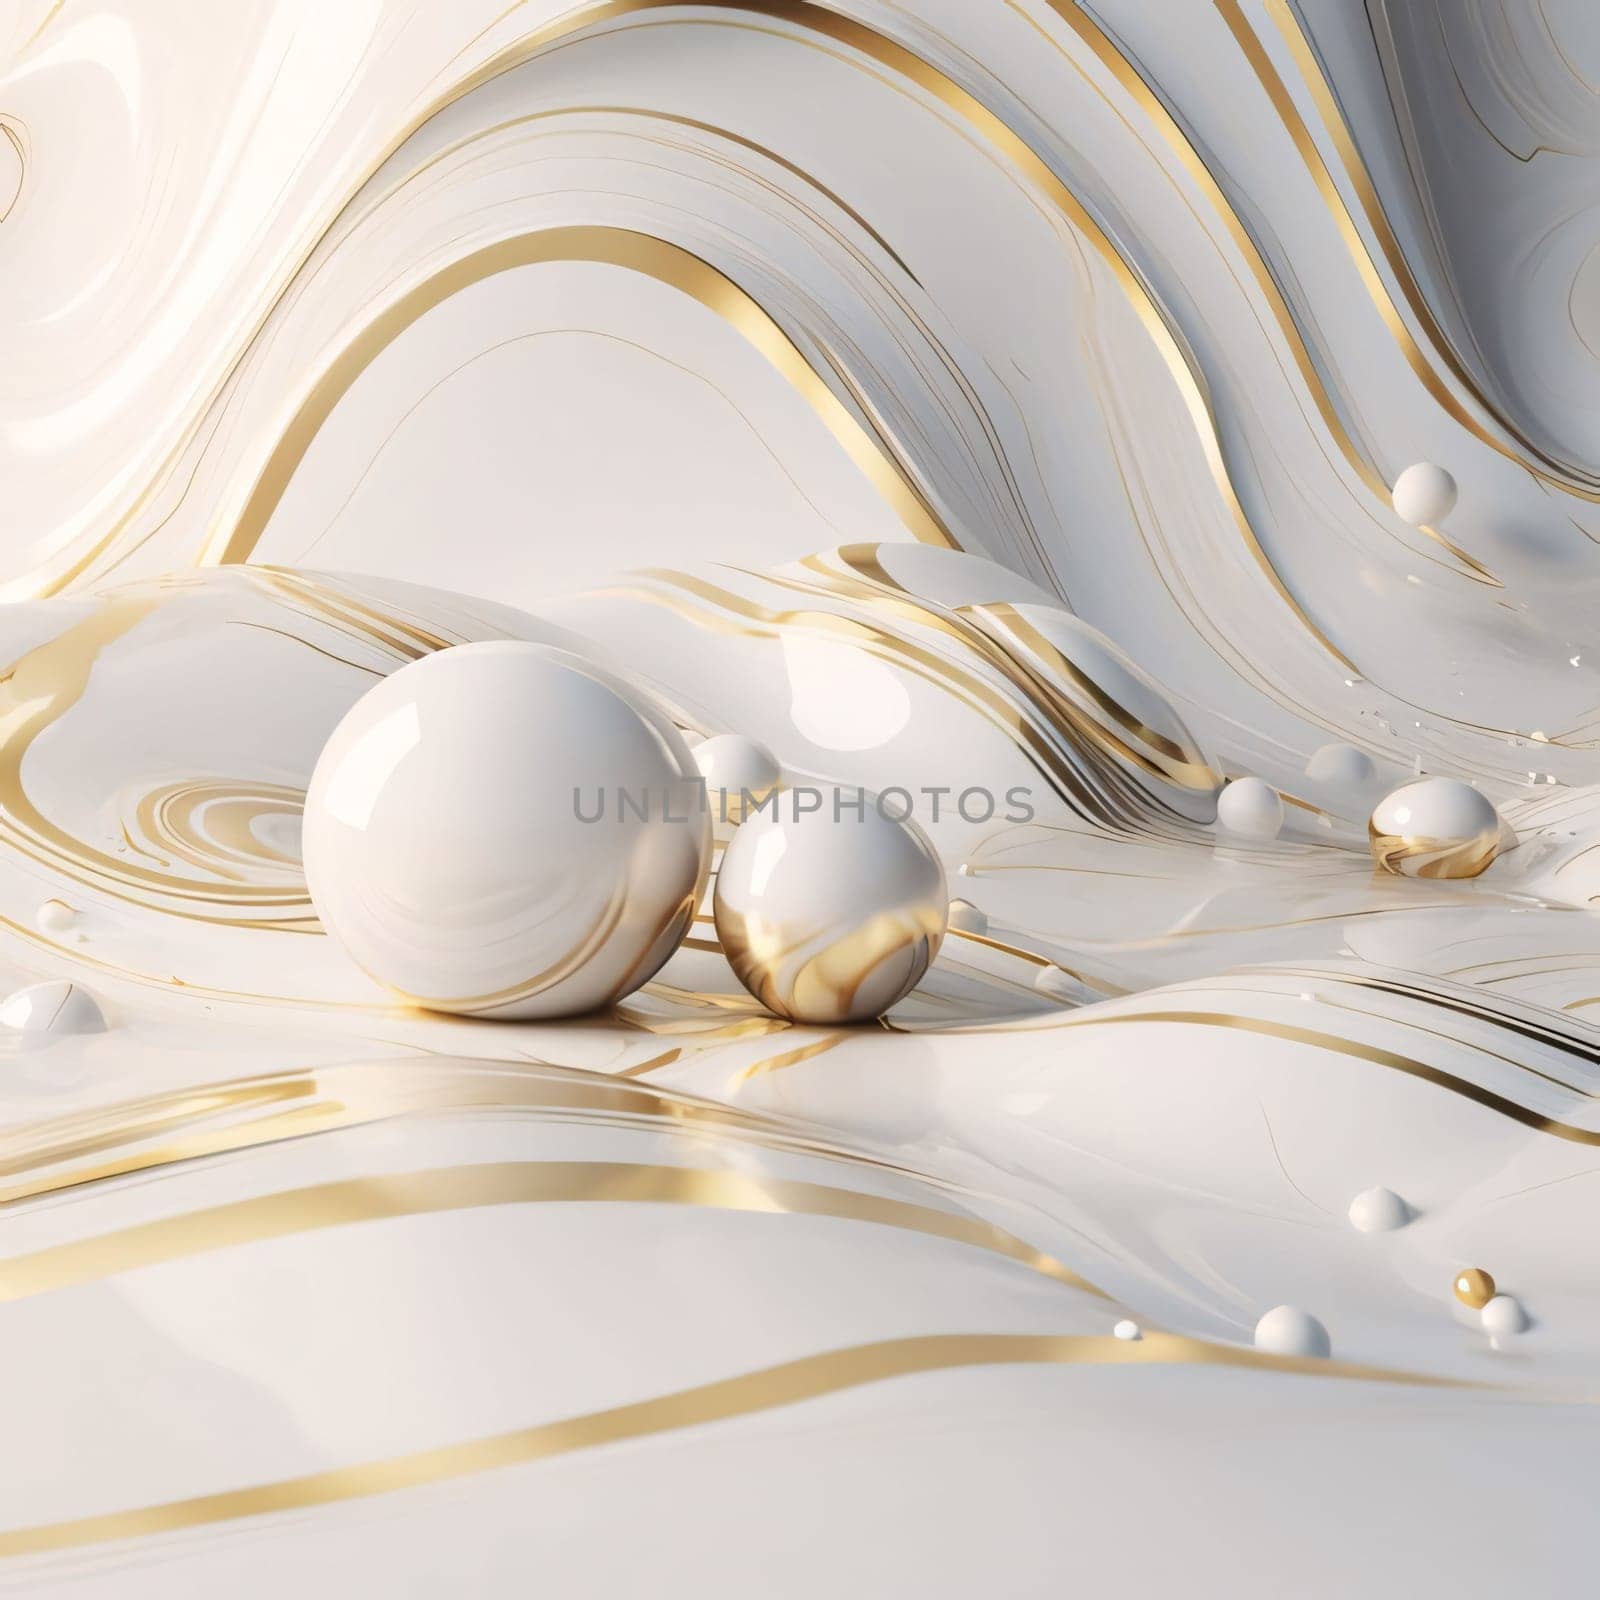 Abstract background design: 3d illustration of abstract background with white and golden liquid and pearl